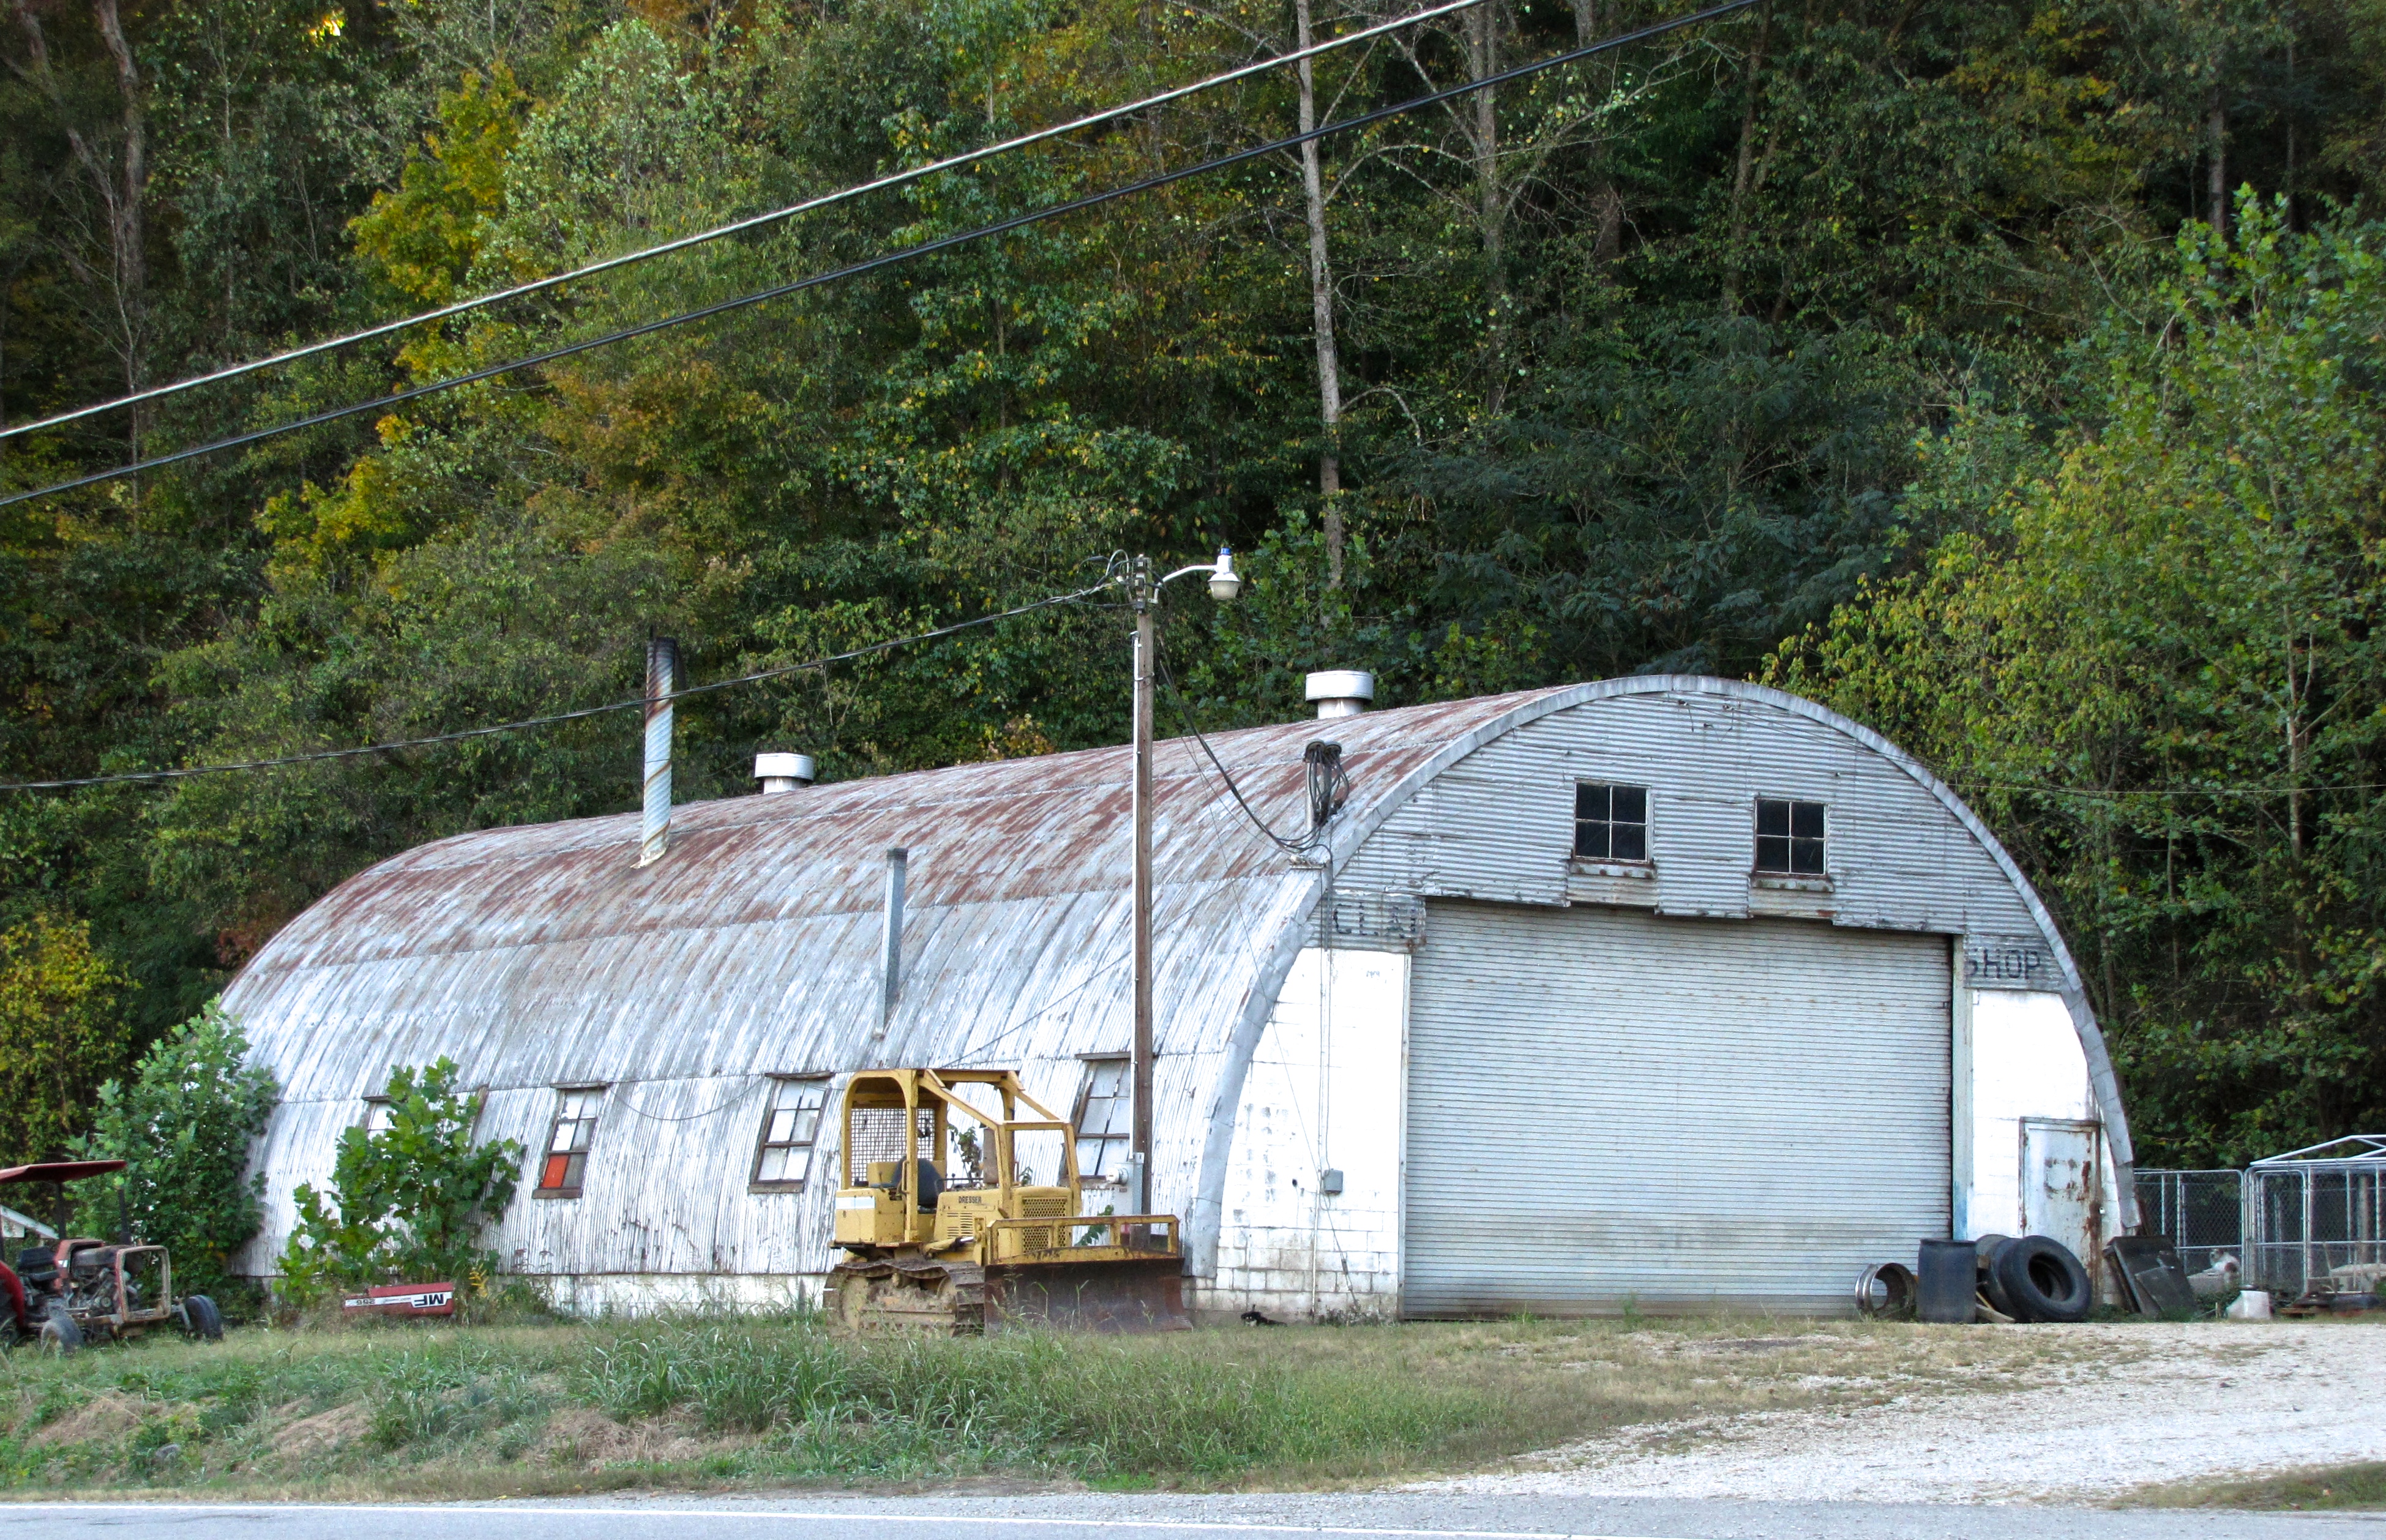 quonset hut in Terms Of Service, ID